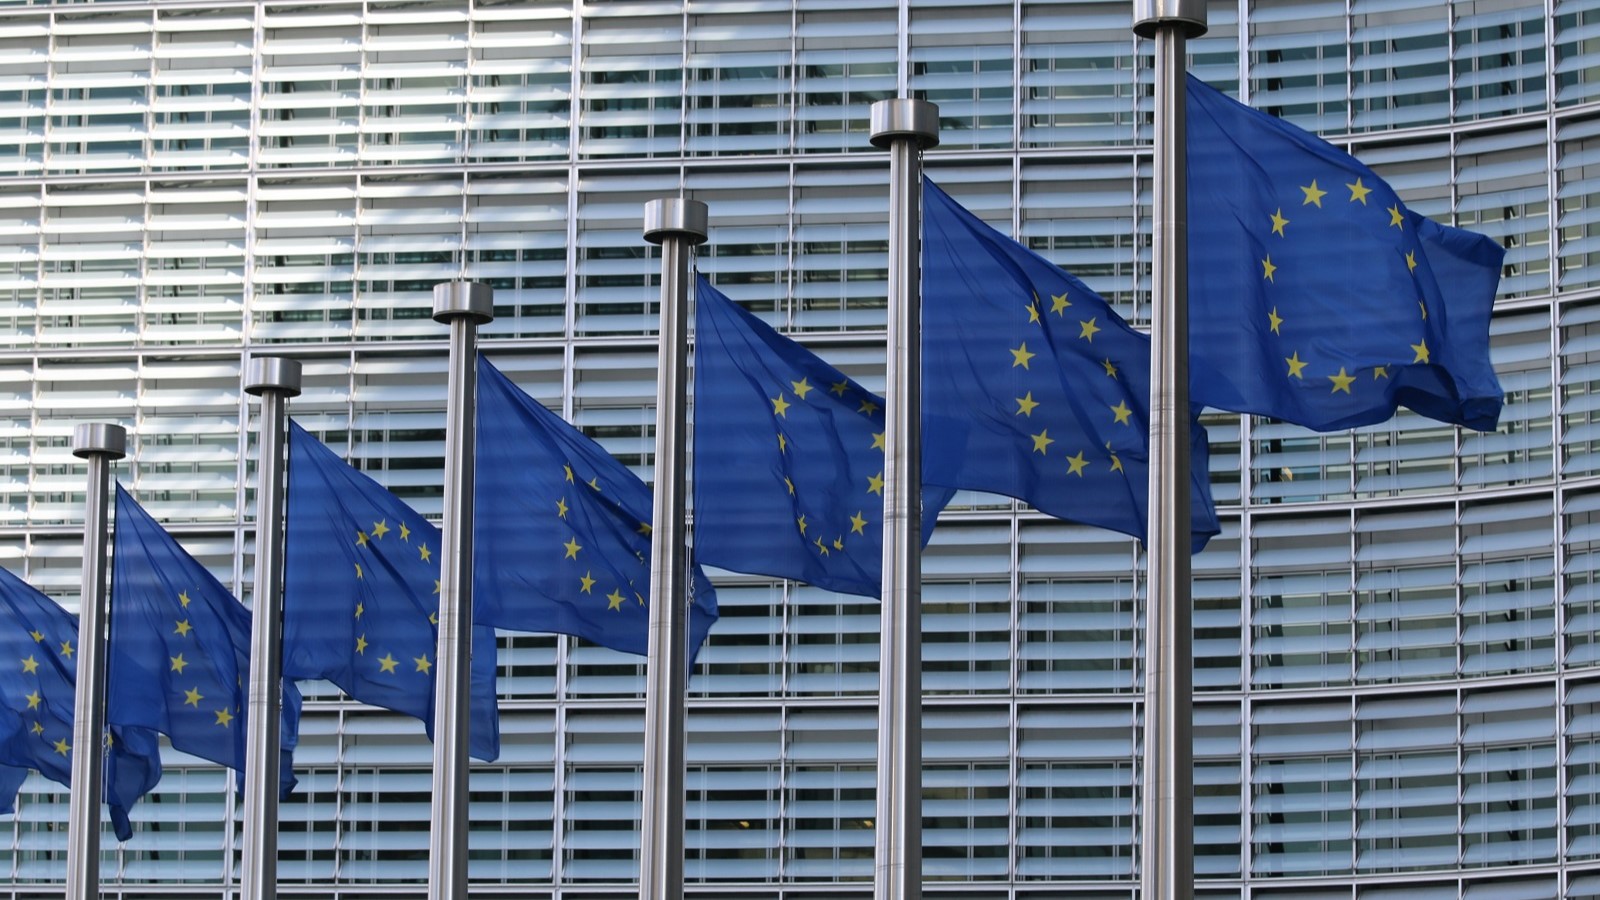 Seven European Union flags on poles outside of large gray building